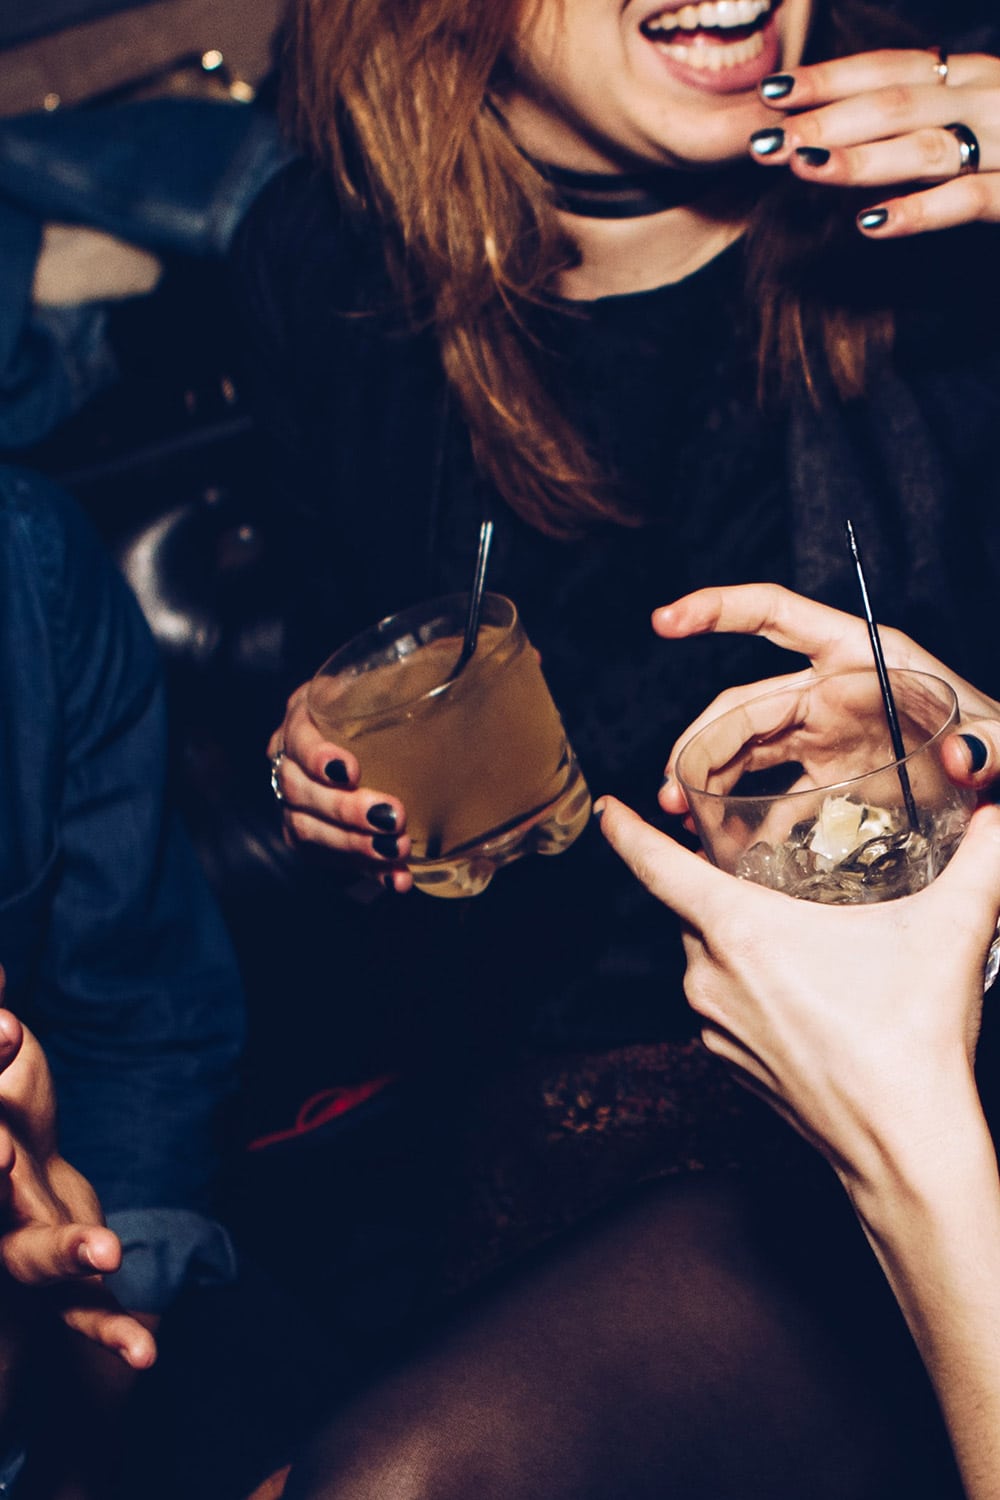 Hip bars and clubs complete the Media Harbor and the neighboring Bilk district. Dance the night away or meet your friends for a drink. However you spend your evening, you are bound to meet interesting new people and mix with the local community.